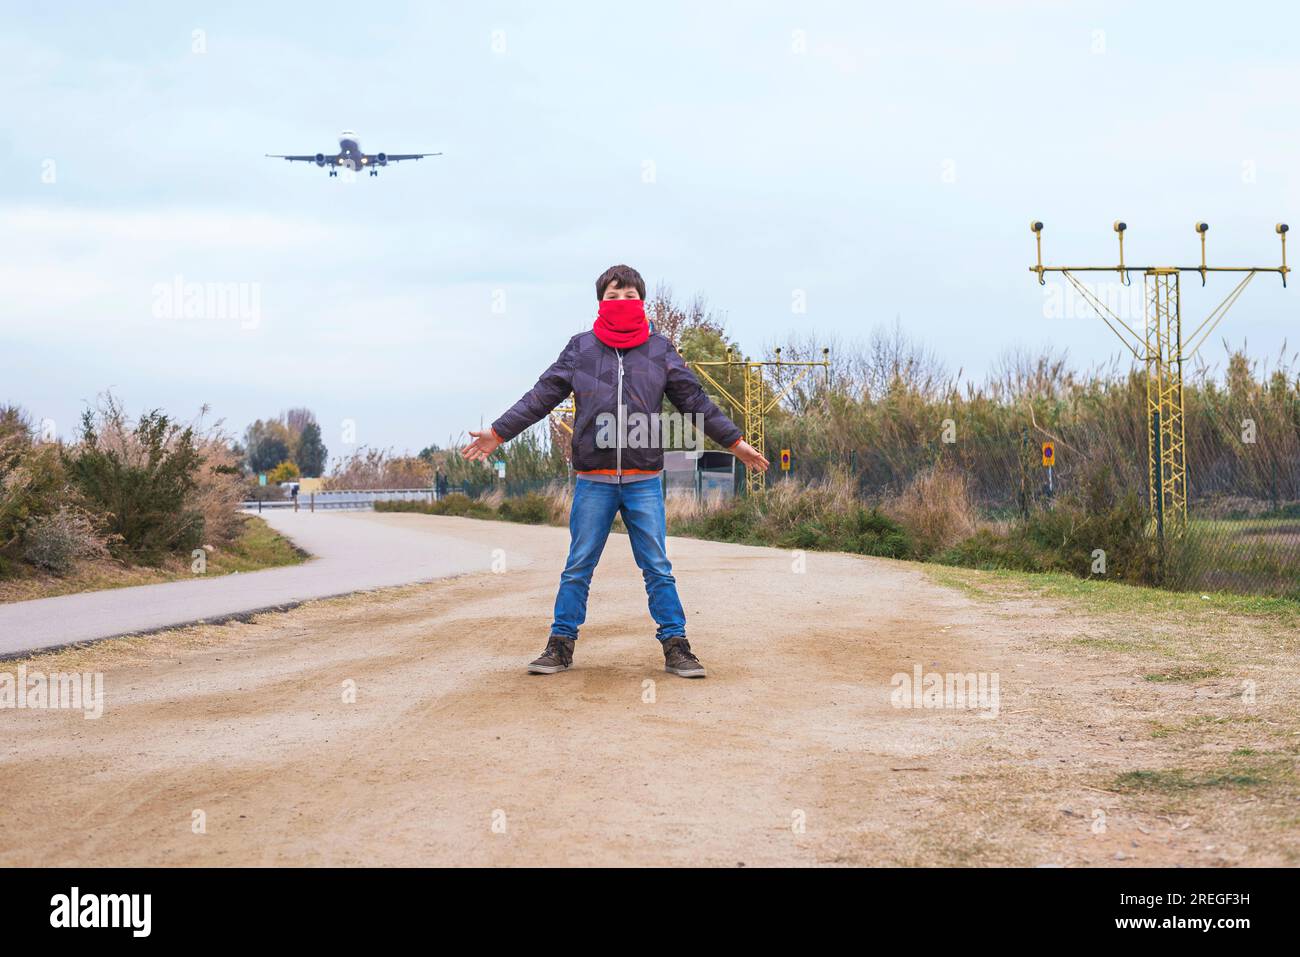 Front view of a boy standing with outstretched arms and wearing a red scarf while an airplane taking off in airport Stock Photo